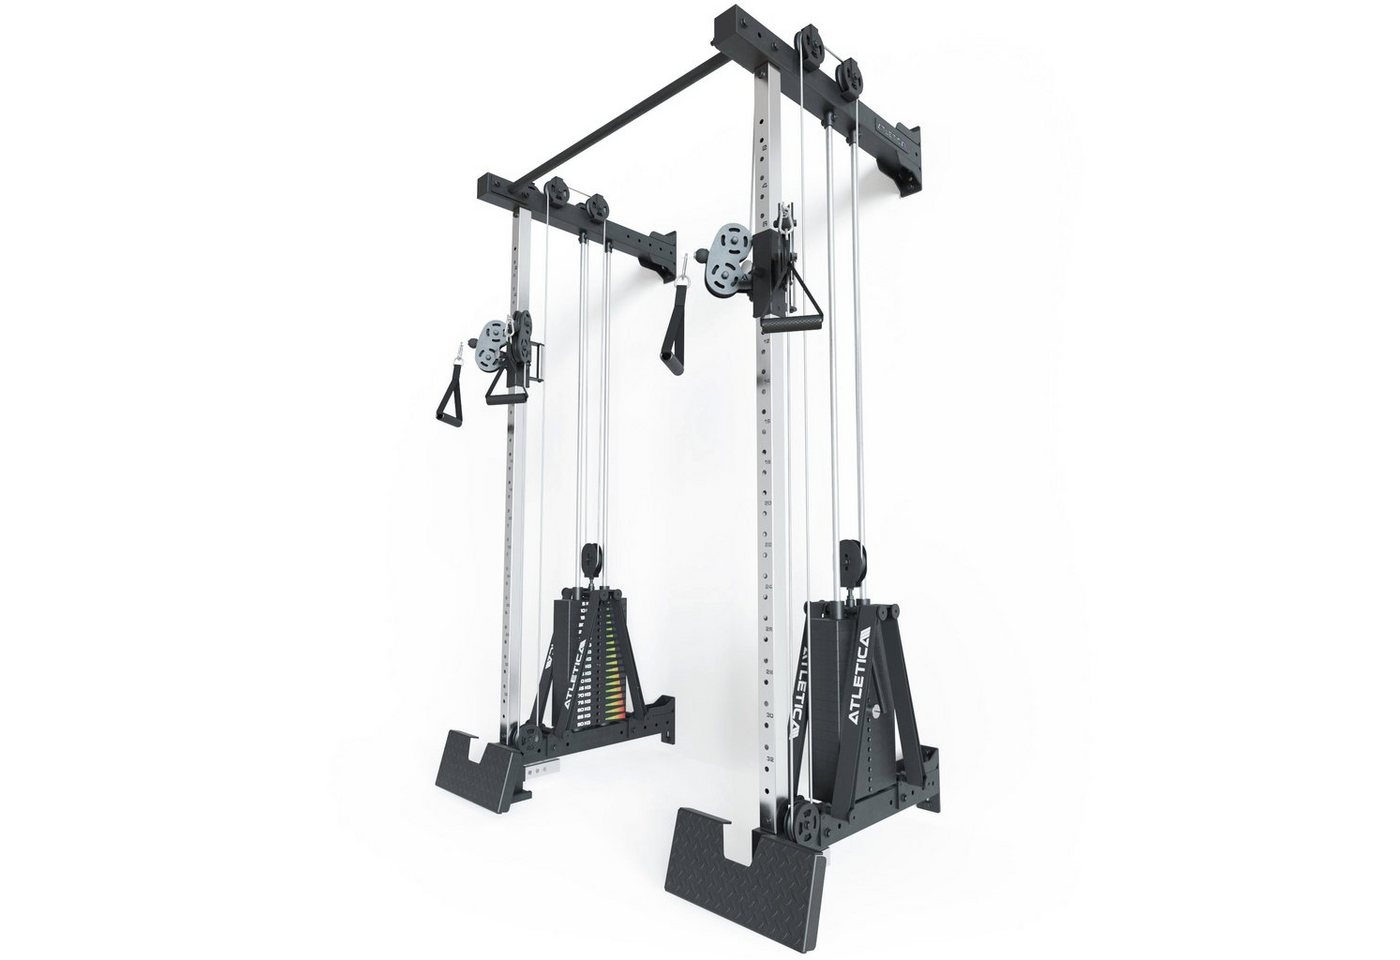 ATLETICA Power Rack R8-Nitro Cable Cross, Wall Mounted Mit 2x90 kg Double Stack von ATLETICA